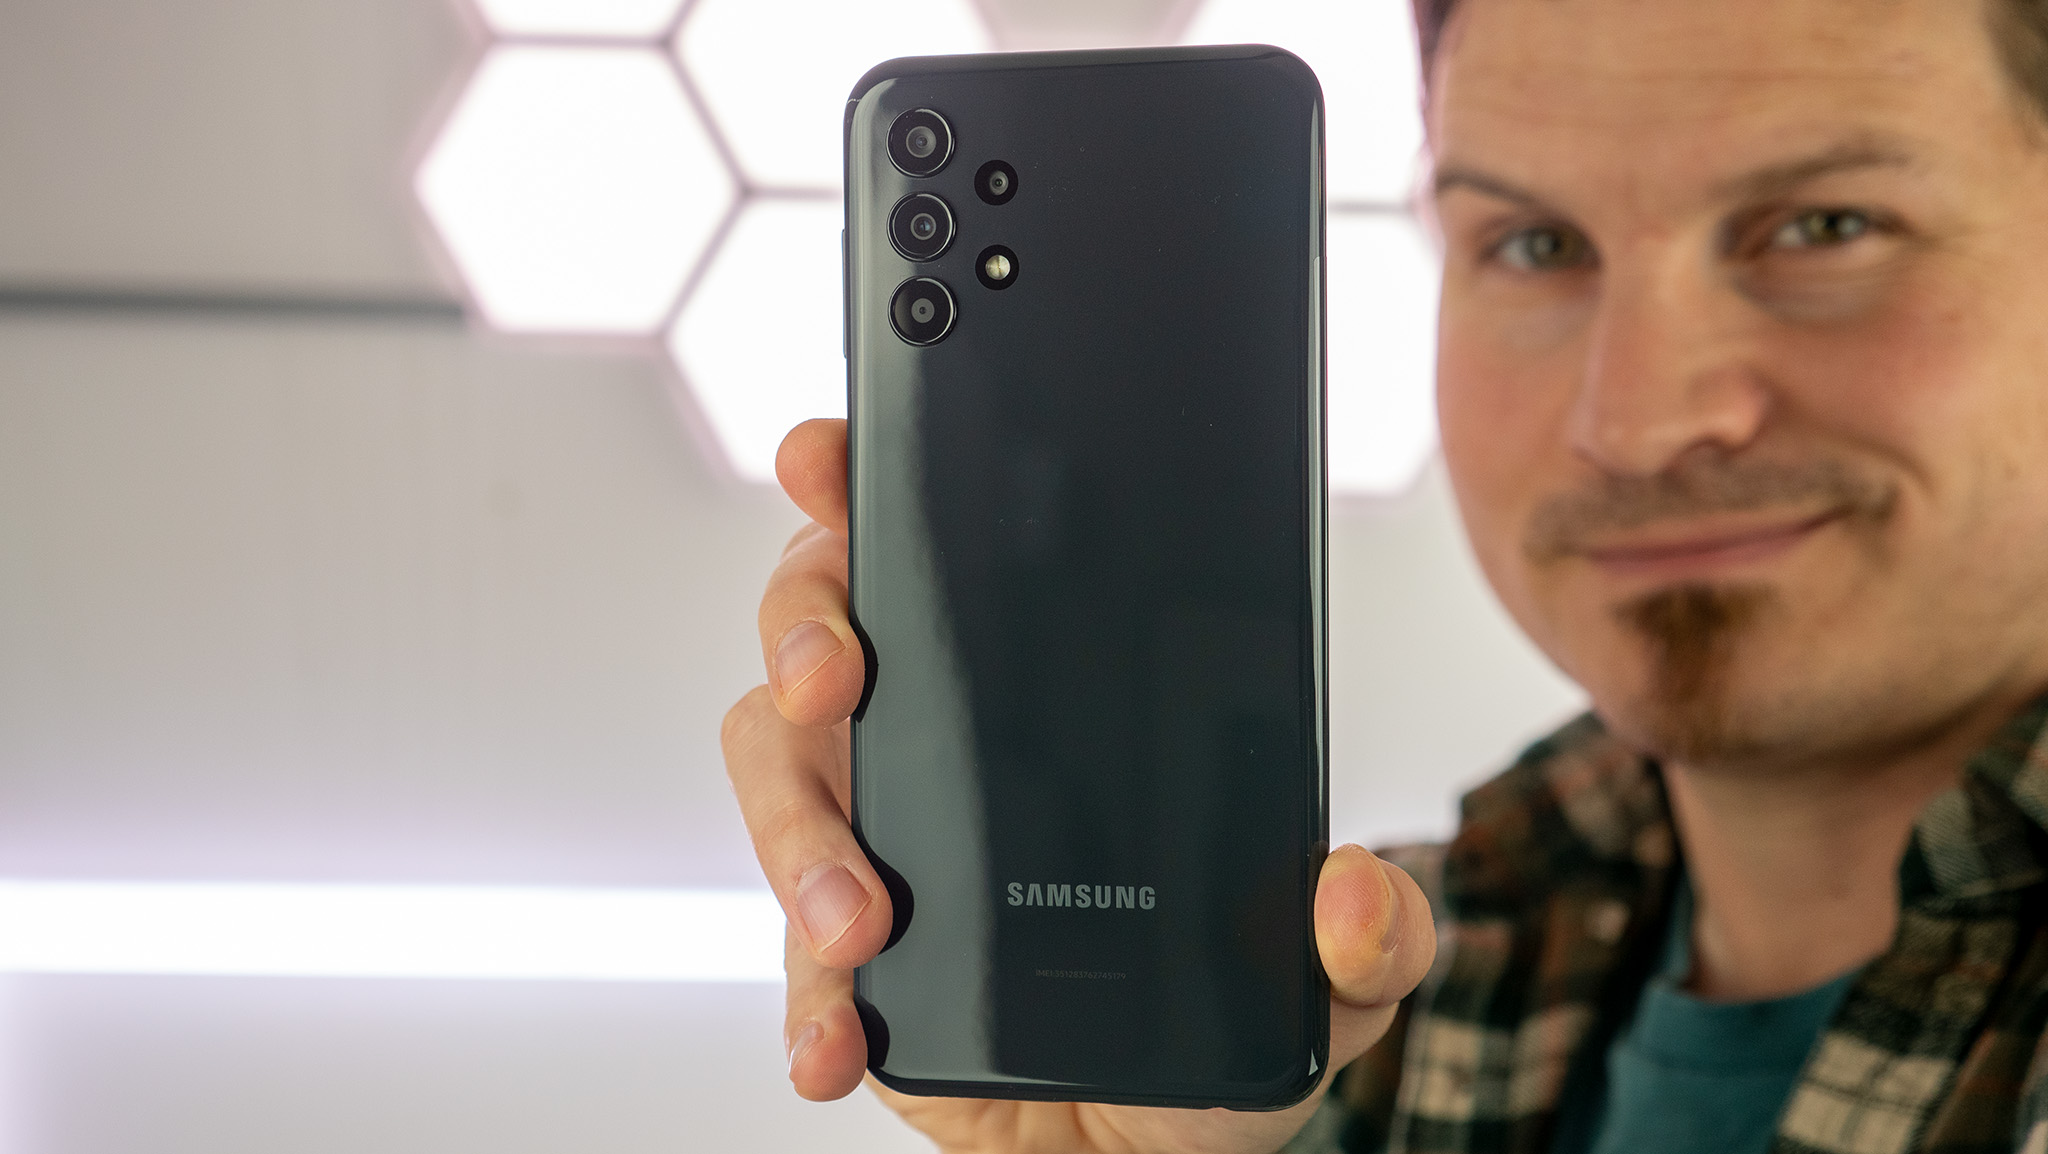 Holding the Samsung Galaxy A13 and showing off the glossy back